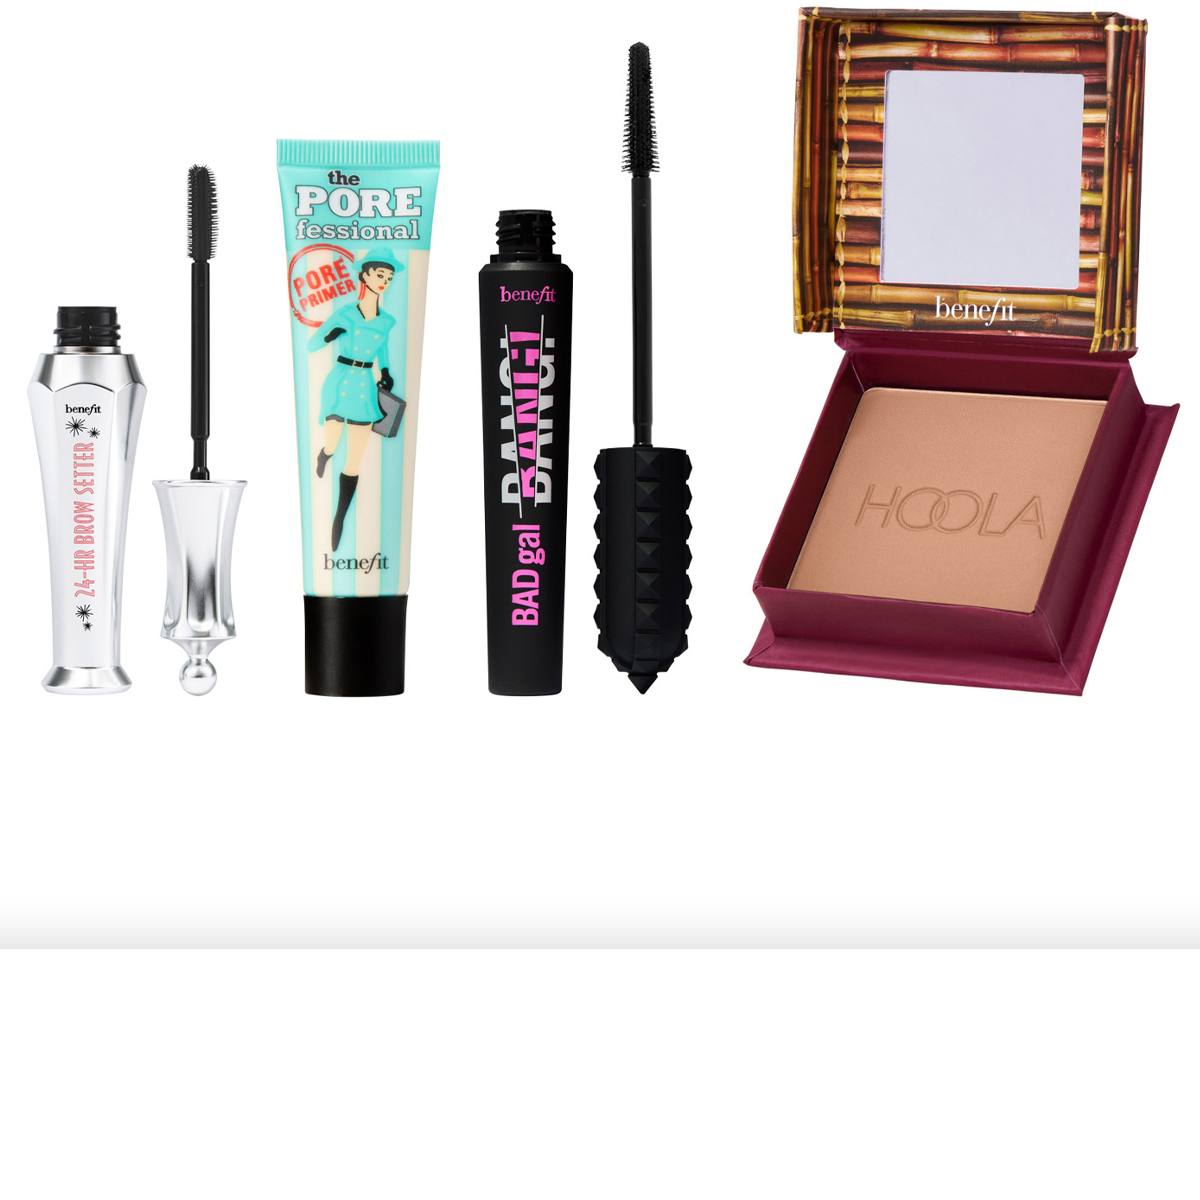 Just Landed - Benefit, Makeup & Hair Products